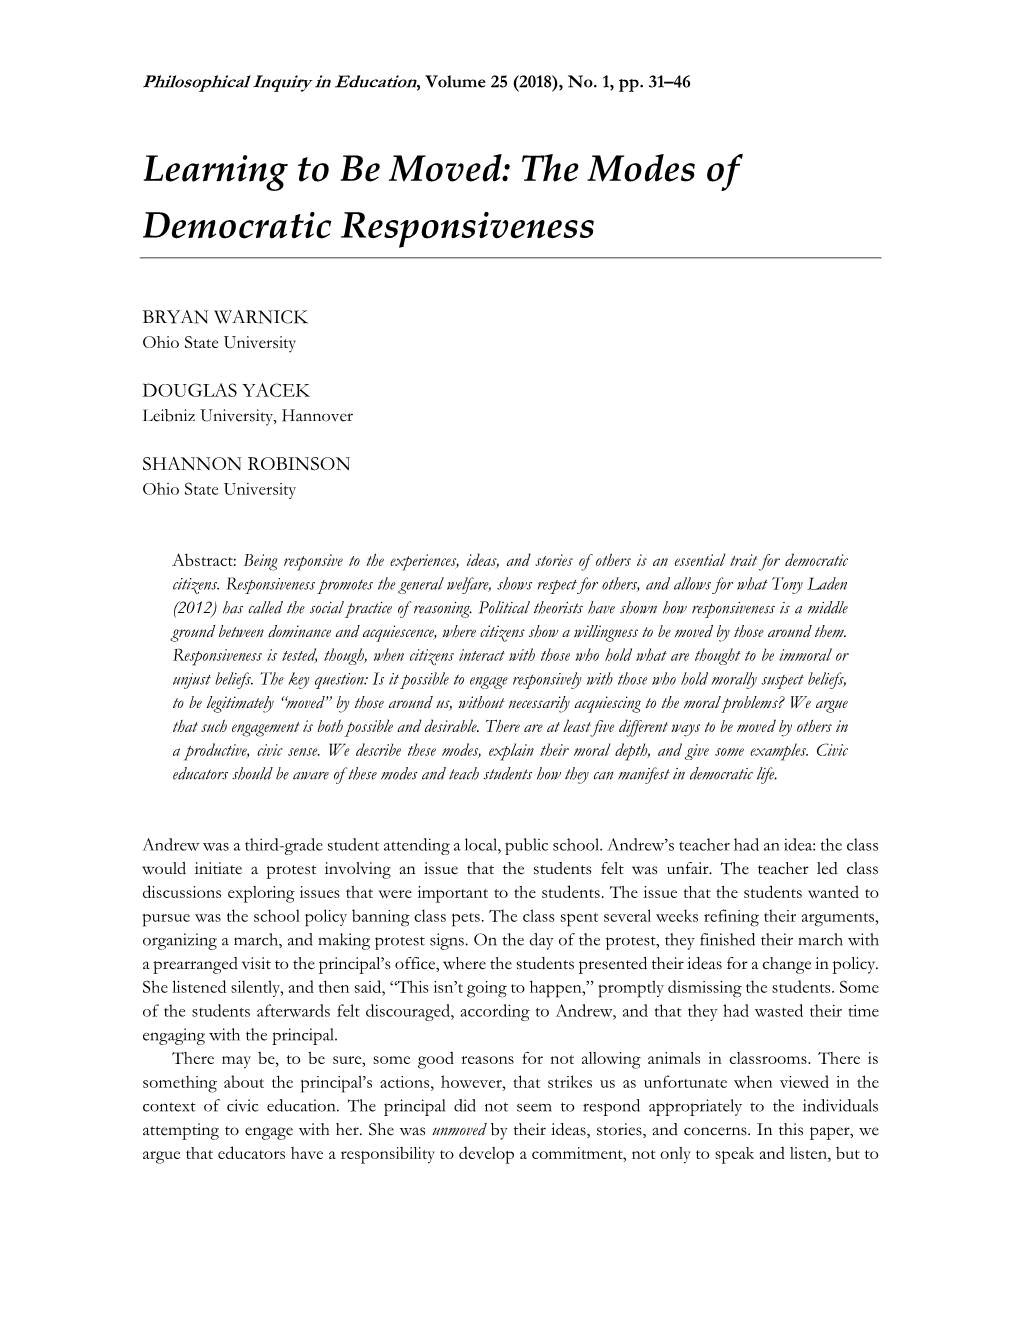 Learning to Be Moved: the Modes of Democratic Responsiveness